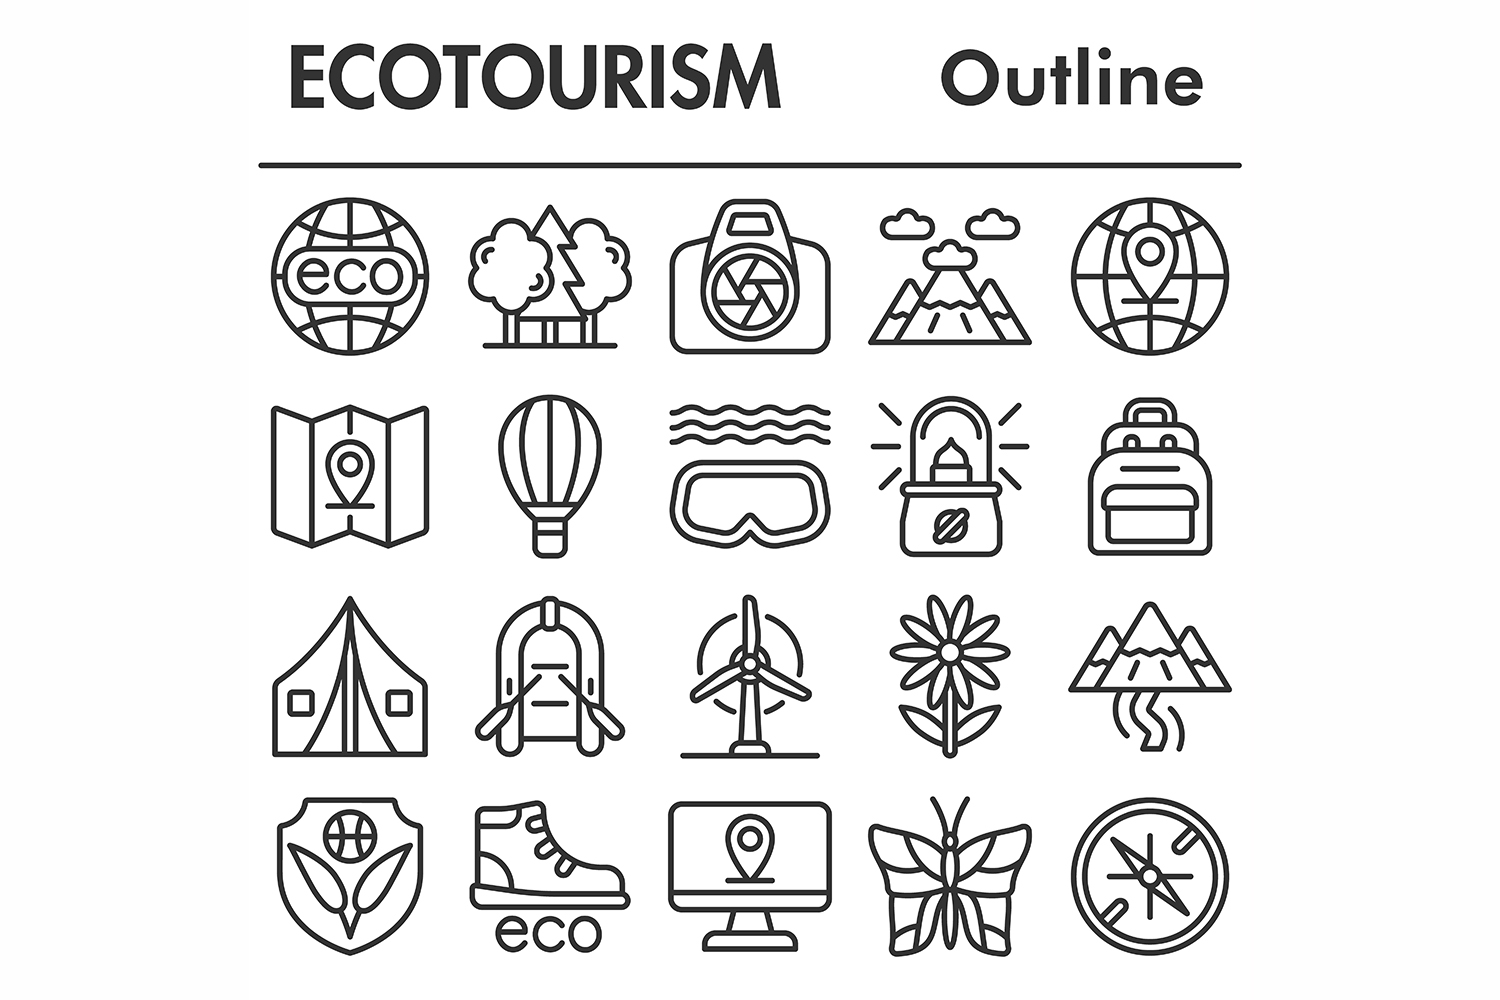 Ecotourism icons set, outline style pinterest preview image.